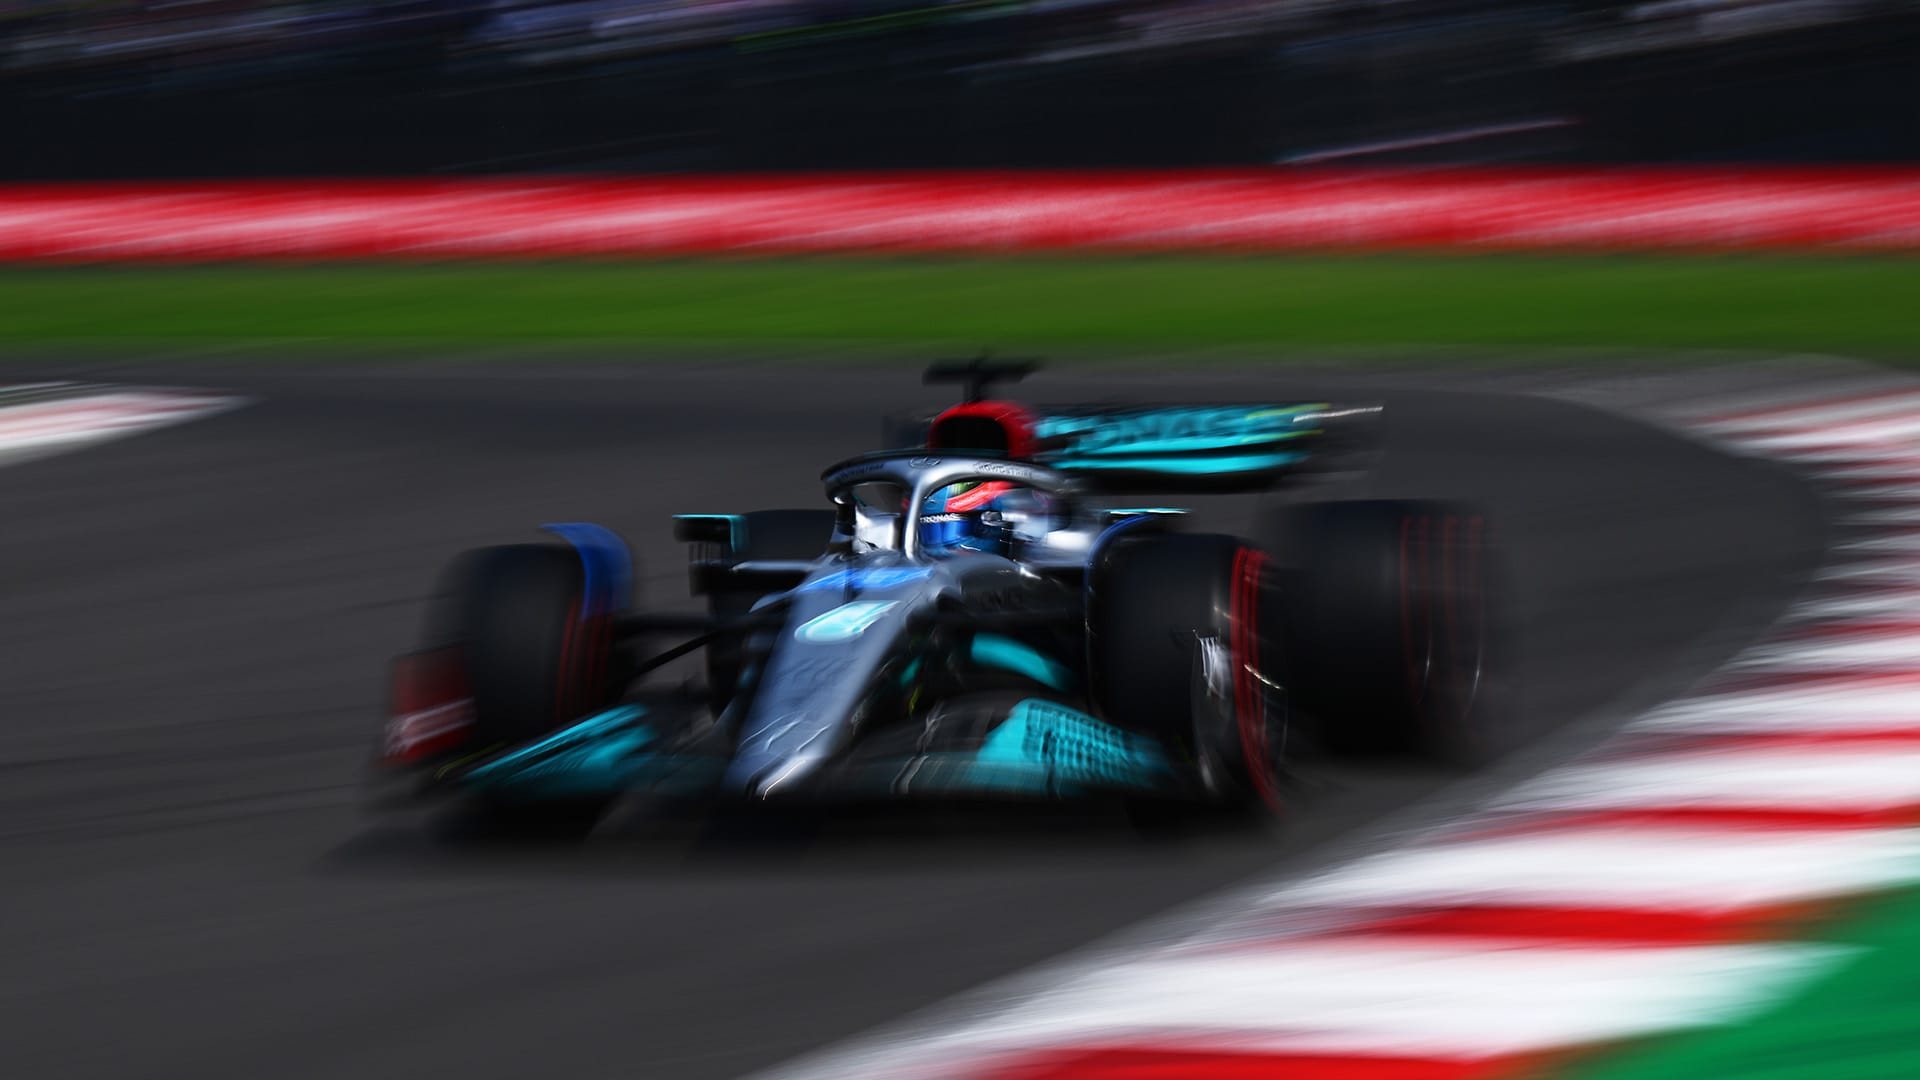 FP3 report and highlights from the 2022 Mexico City Grand Prix Russell leads Hamilton as Mercedes claim 1-2 during final practice in Mexico City Formula 1®